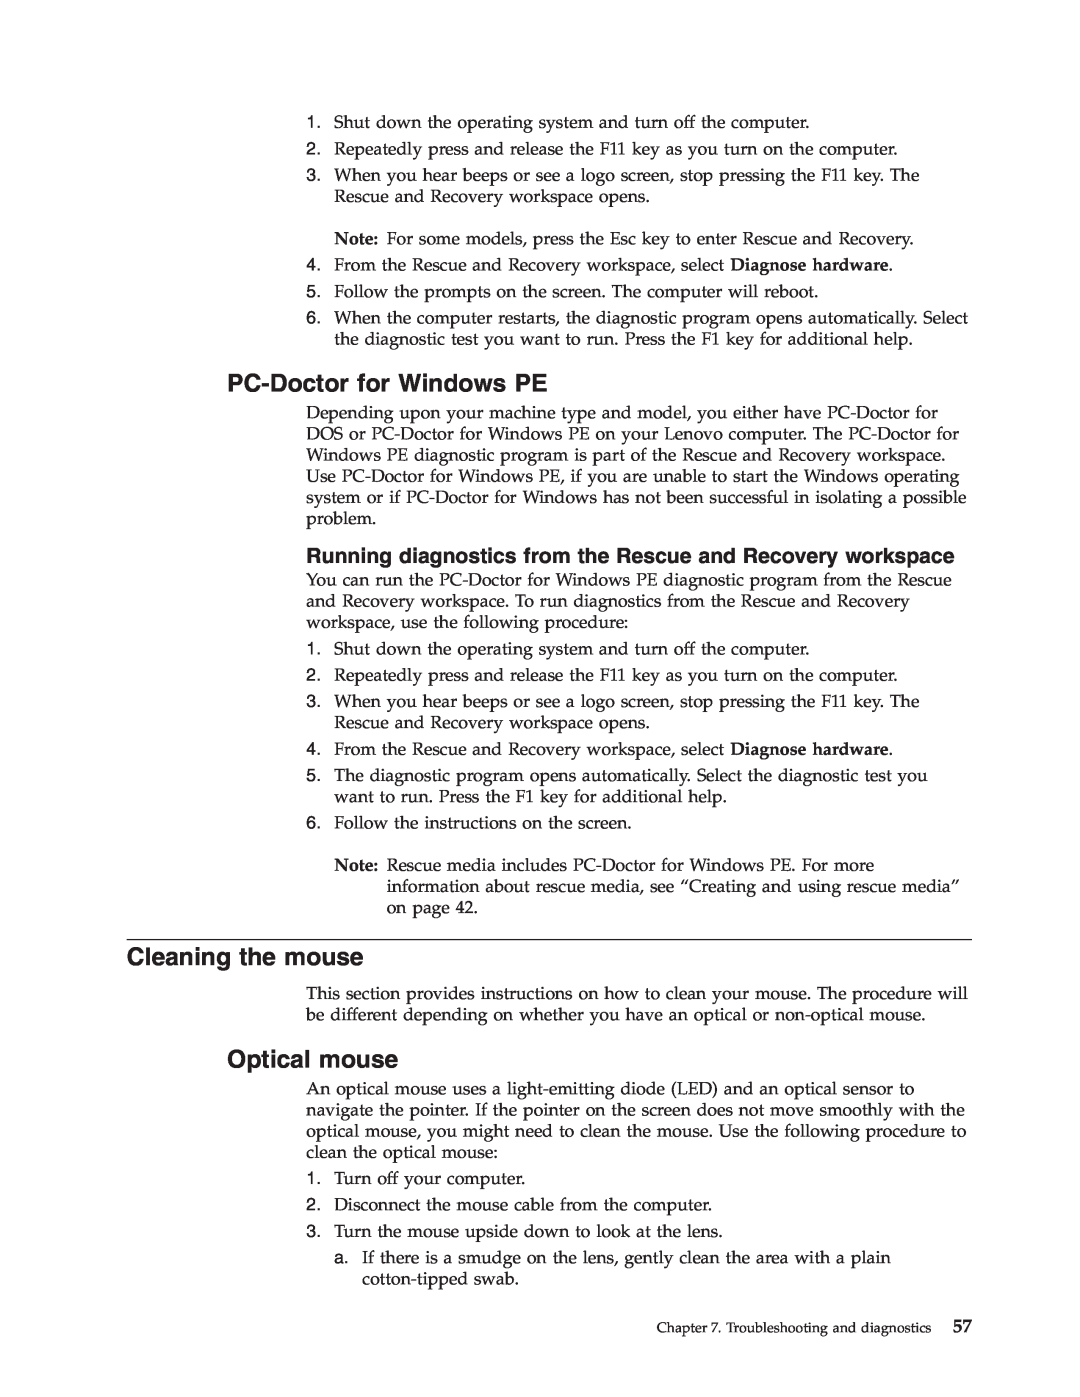 Lenovo 3000 J Series manual PC-Doctorfor Windows PE, Cleaning the mouse, Optical mouse 